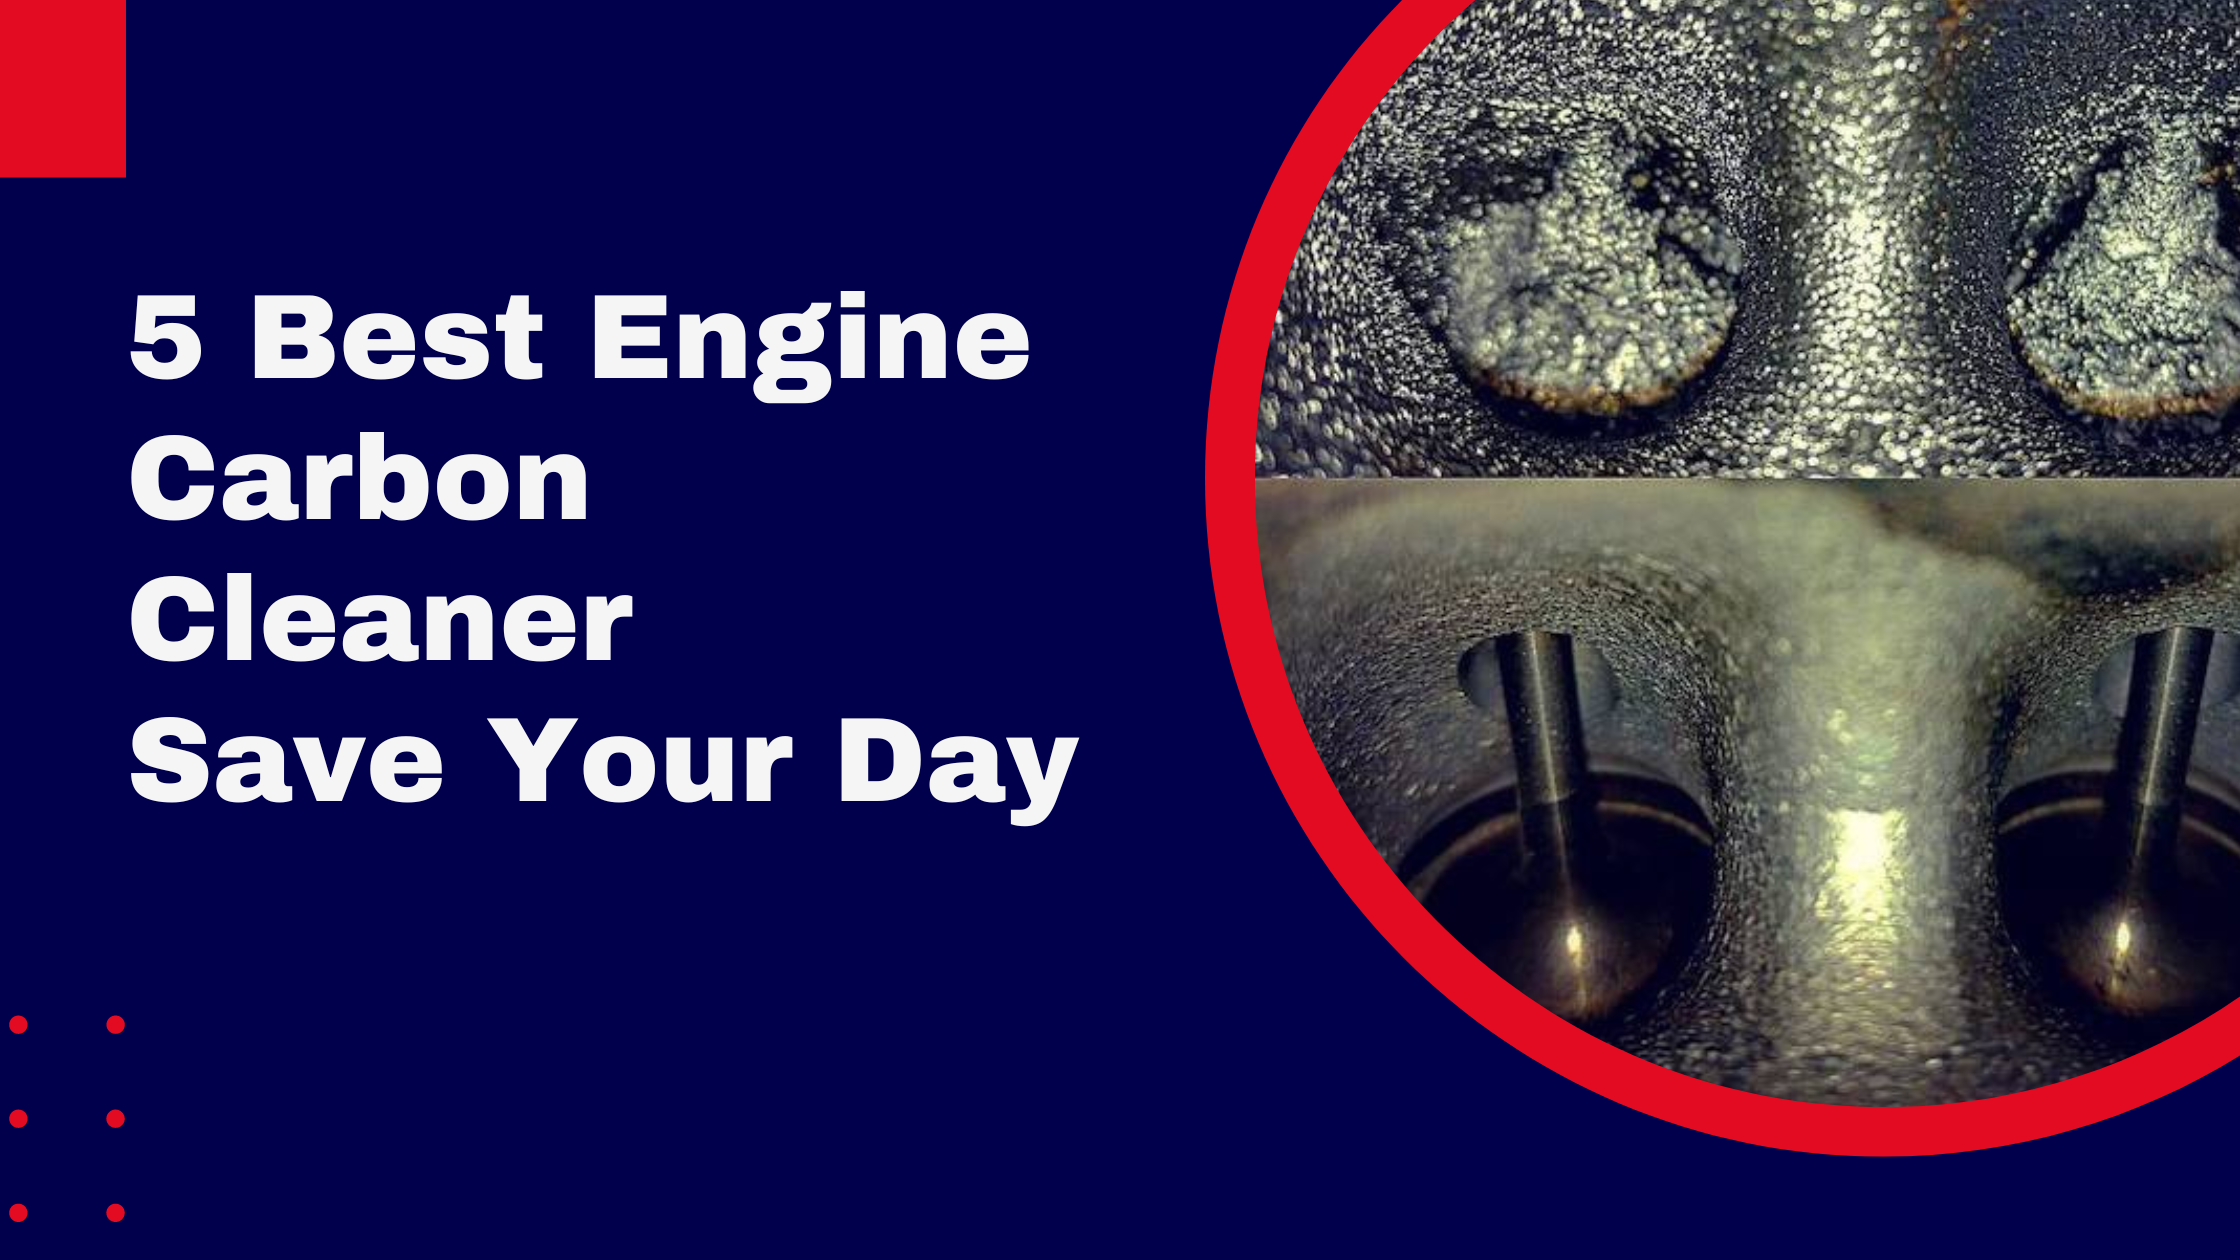 5-best-engine-carbon-cleaner-save-your-day